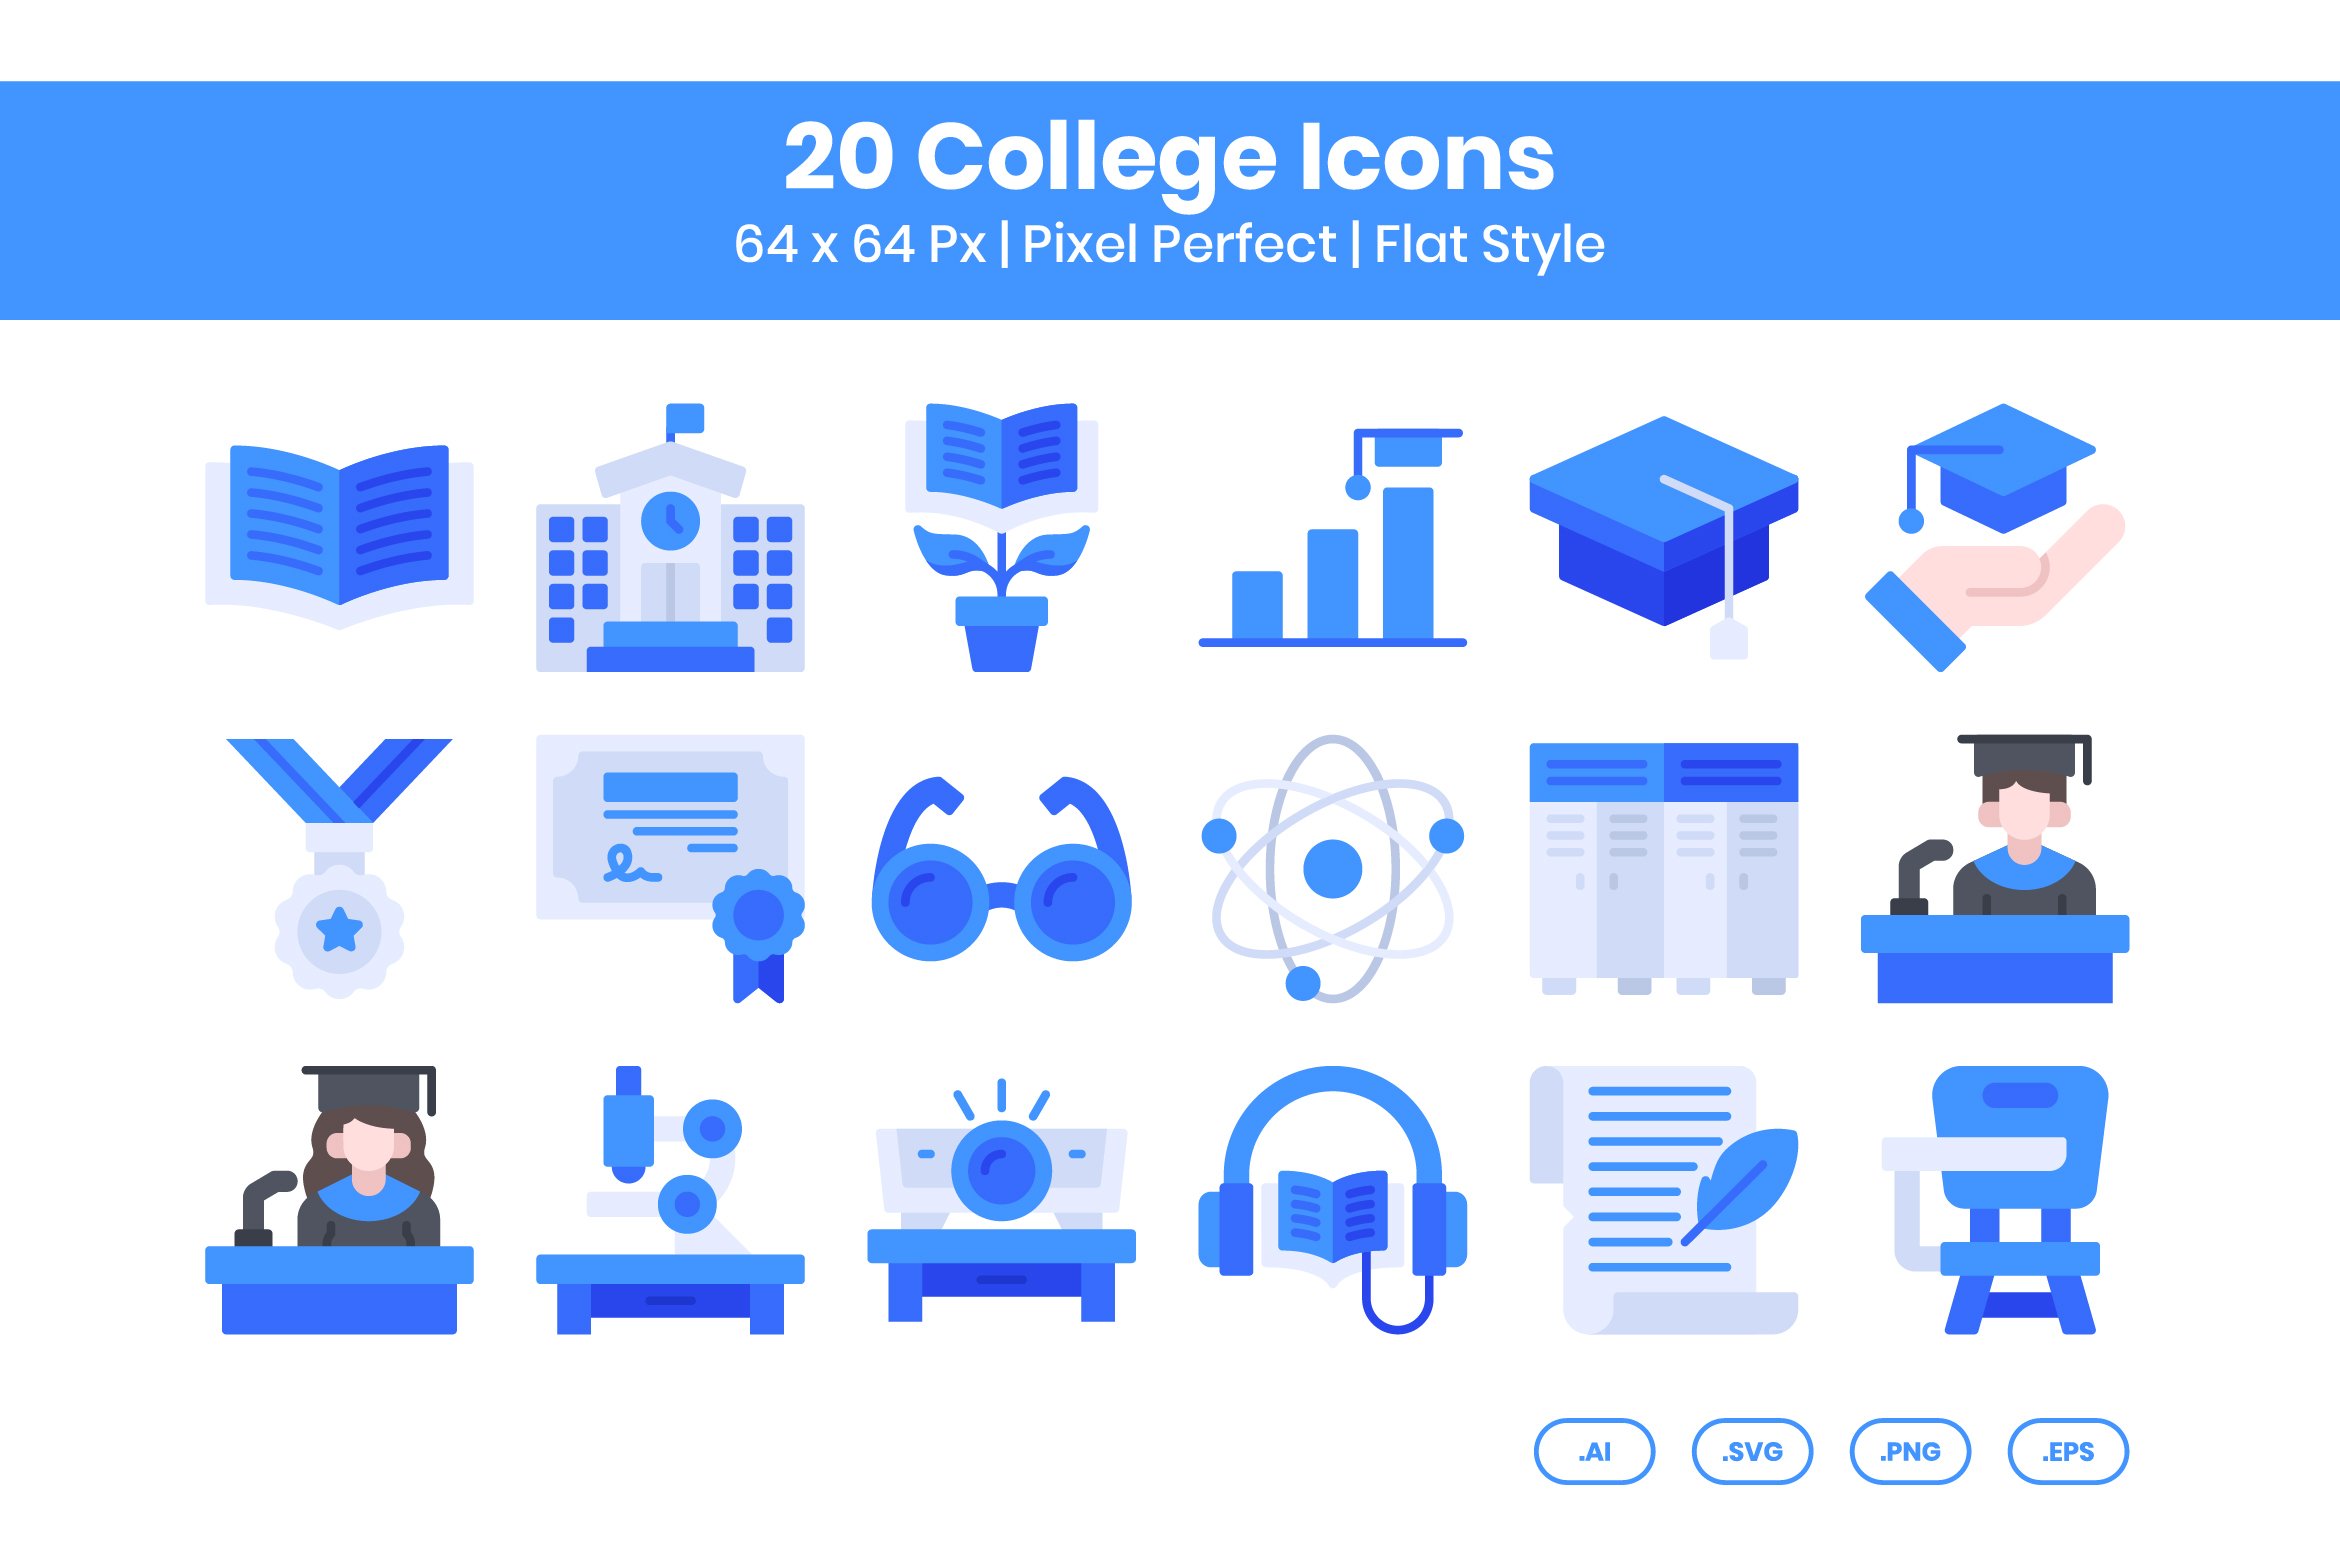 20 College - Flat cover image.